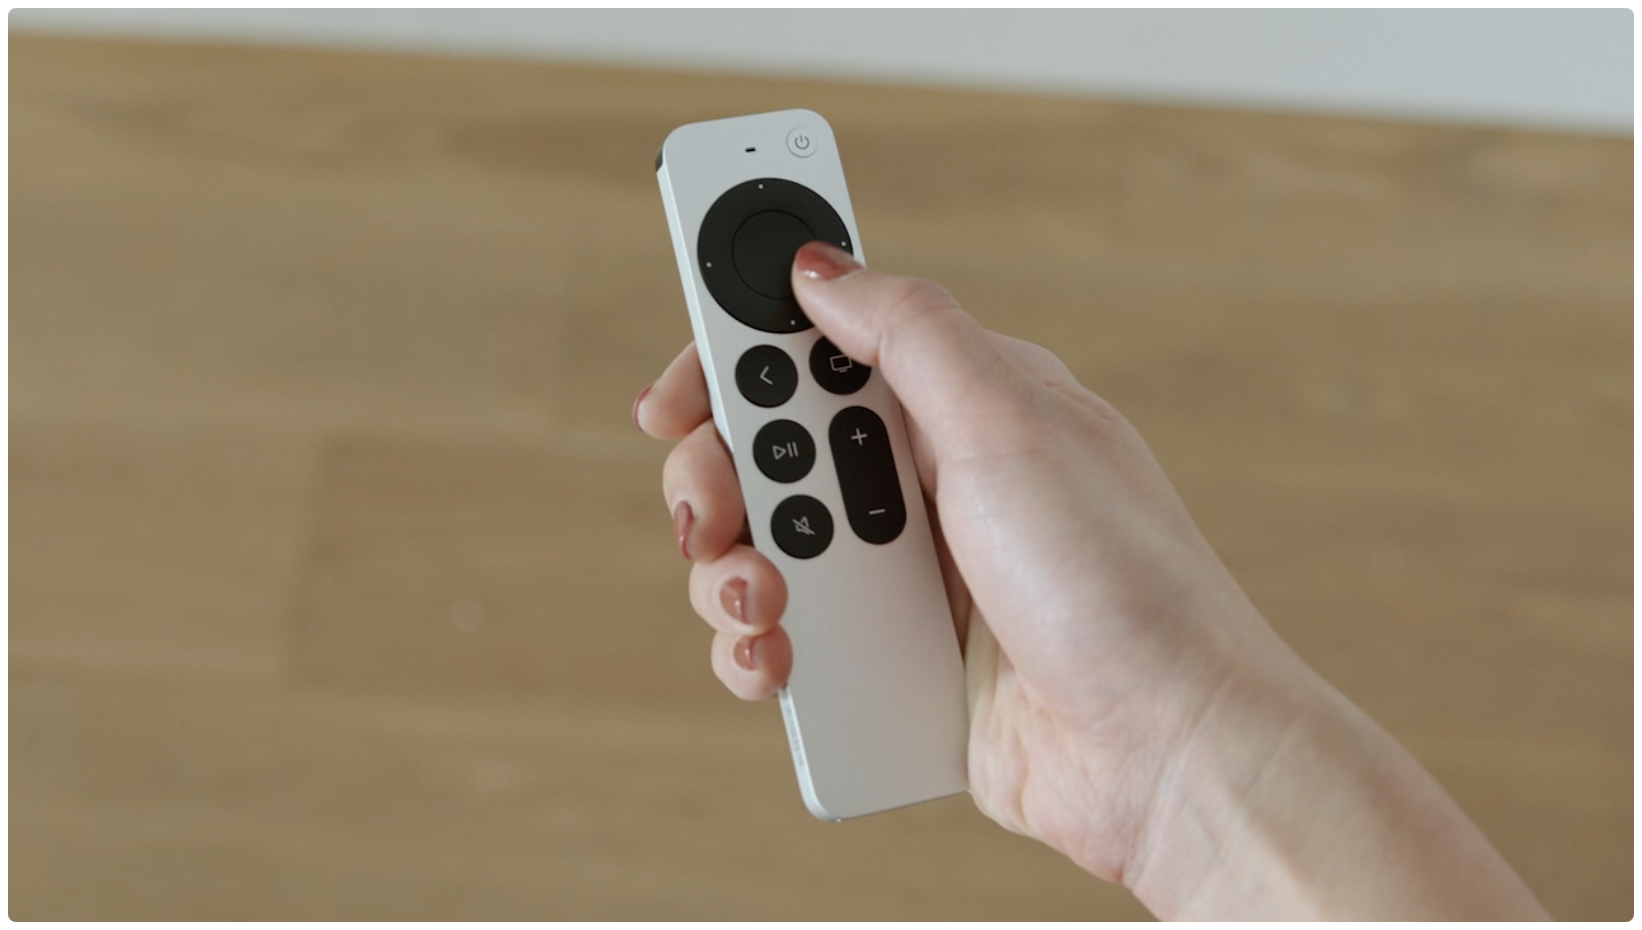 Apple's promotional image showing the redesigned Siri Remote from 2021